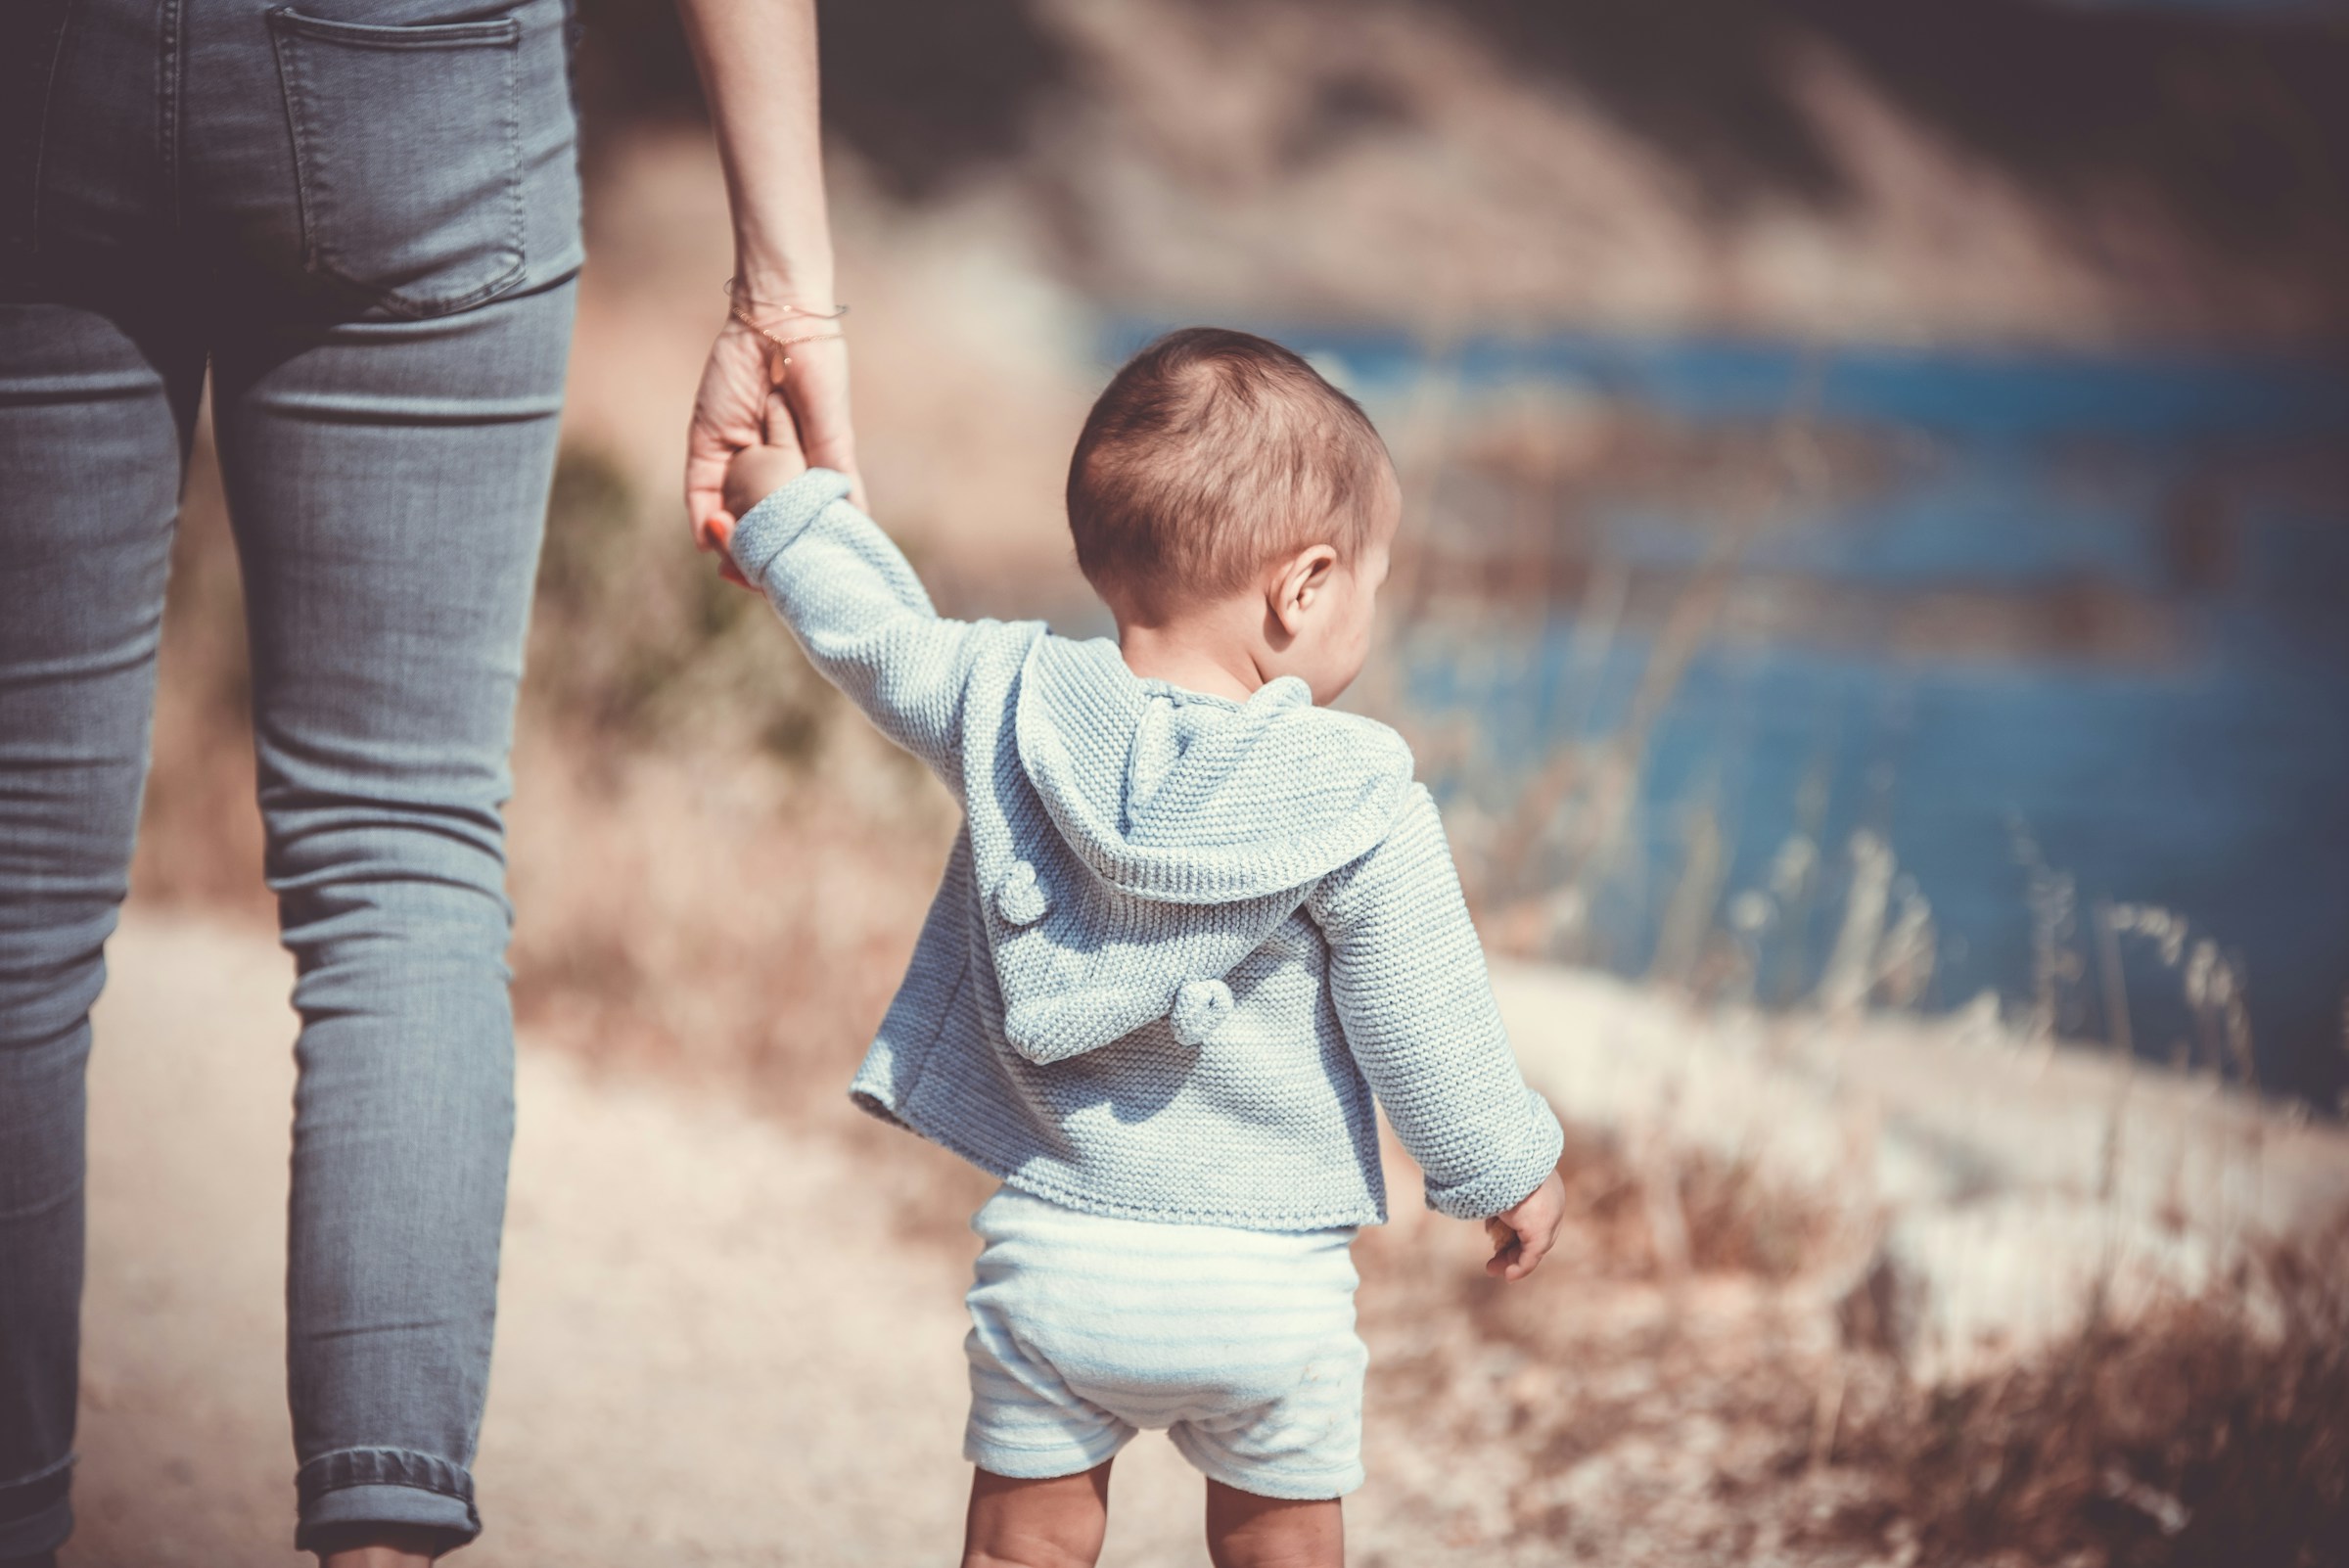 A woman holding a toddler's hand | Source: Unsplash